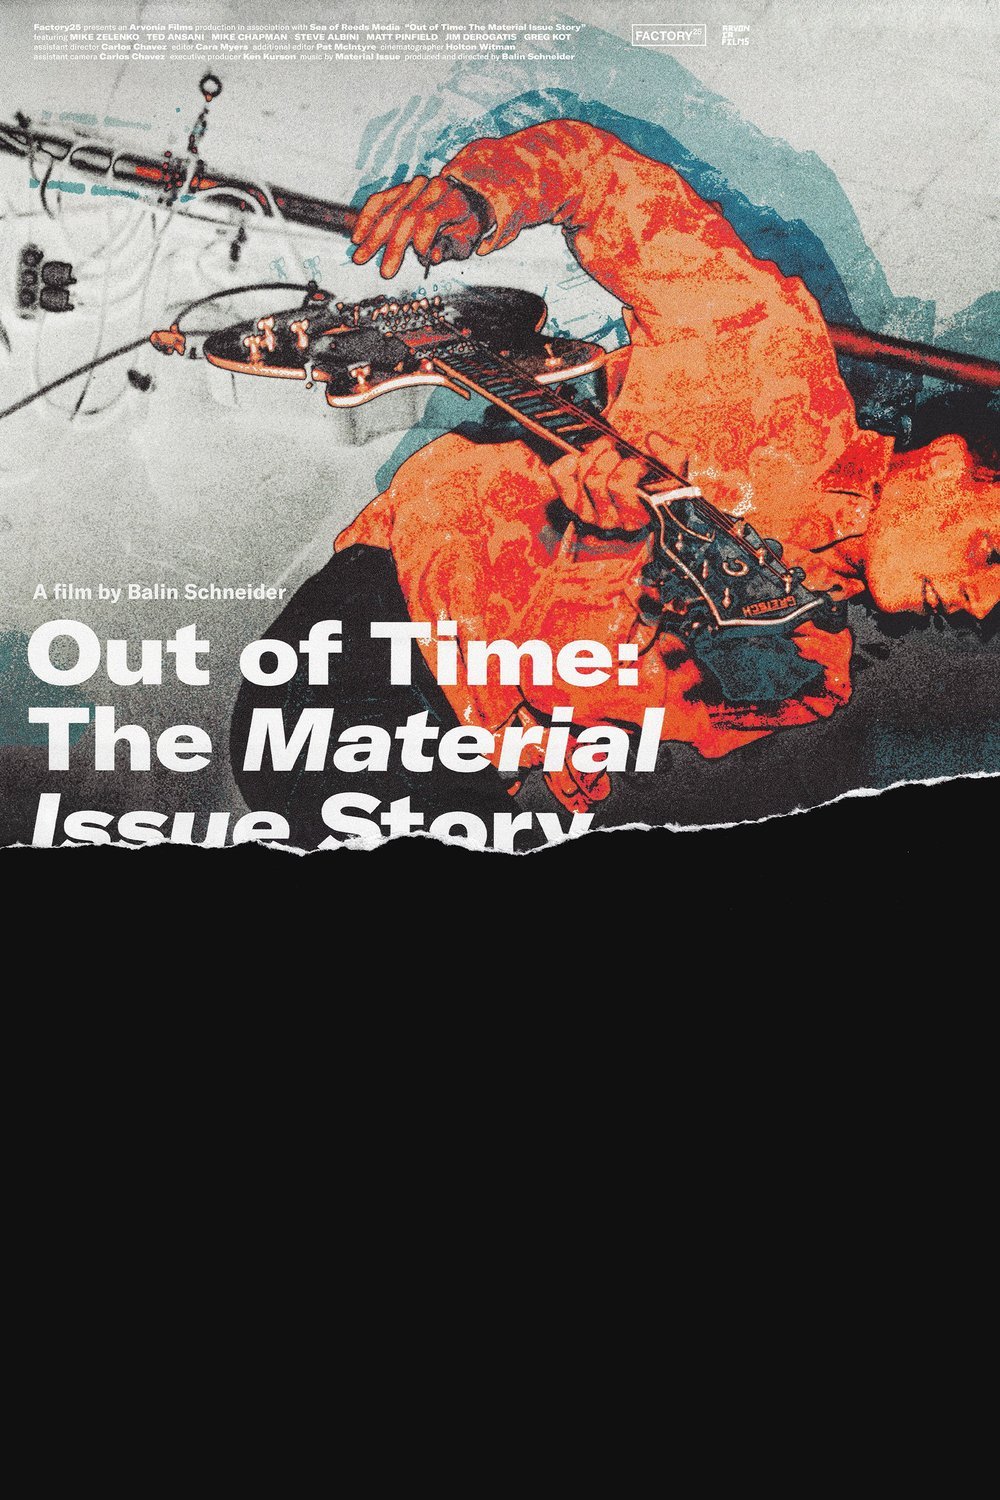 L'affiche du film Out of Time: The Material Issue Story